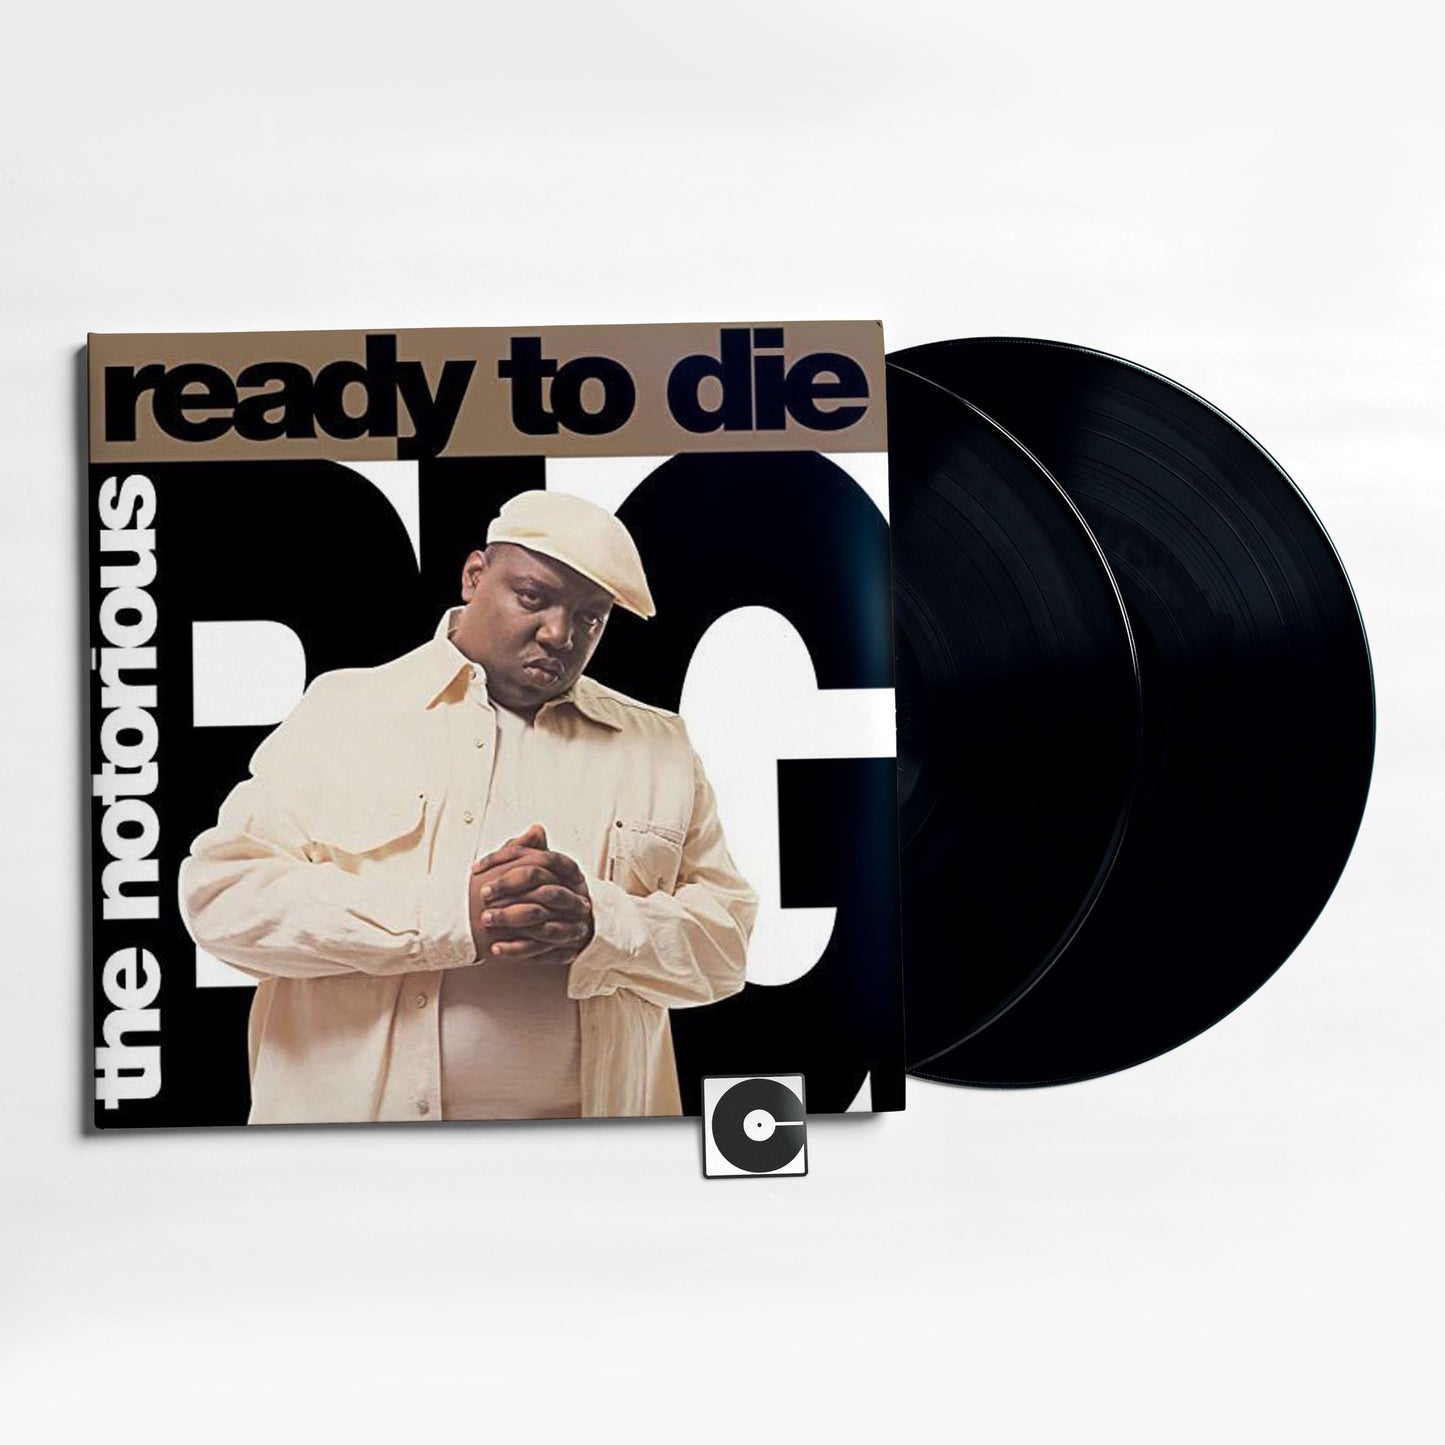 Notorious B.I.G. - "Ready To Die"